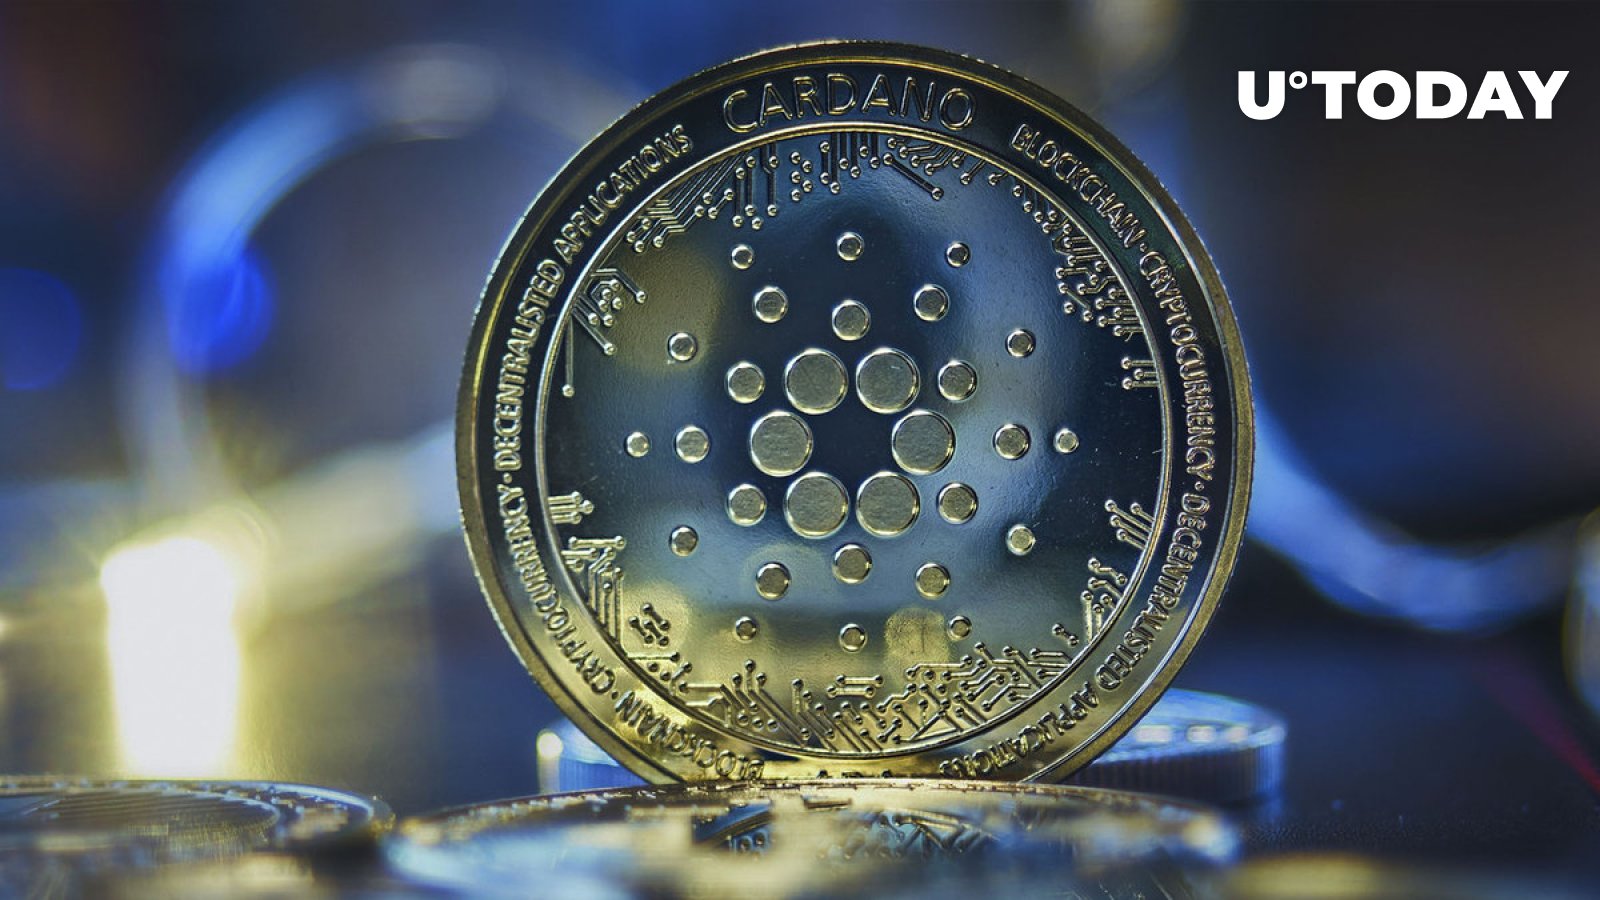 Cardano Djed Stablecoin Scores New Listing: Details - BitcoinEthereumNews.com